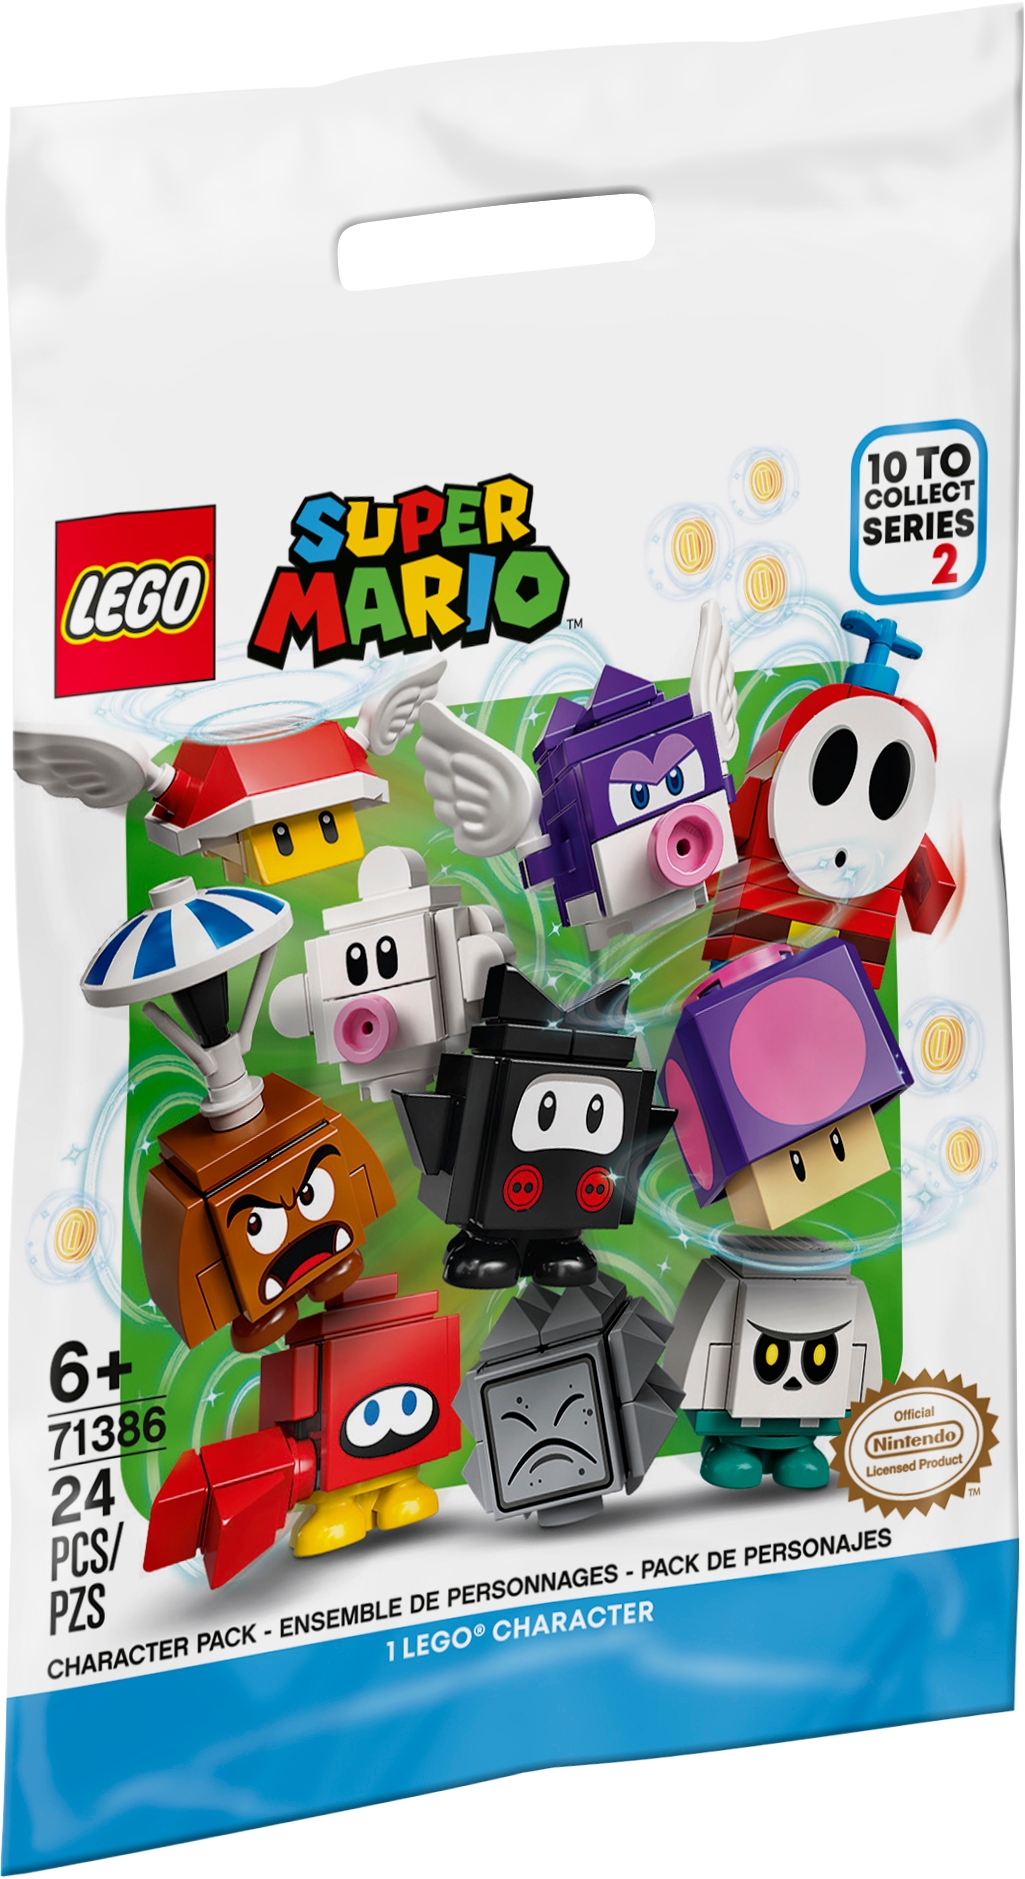 Lego 71394 Super Mario Character Pack Blind Bag Series 3 6 Years 10 to Collect 